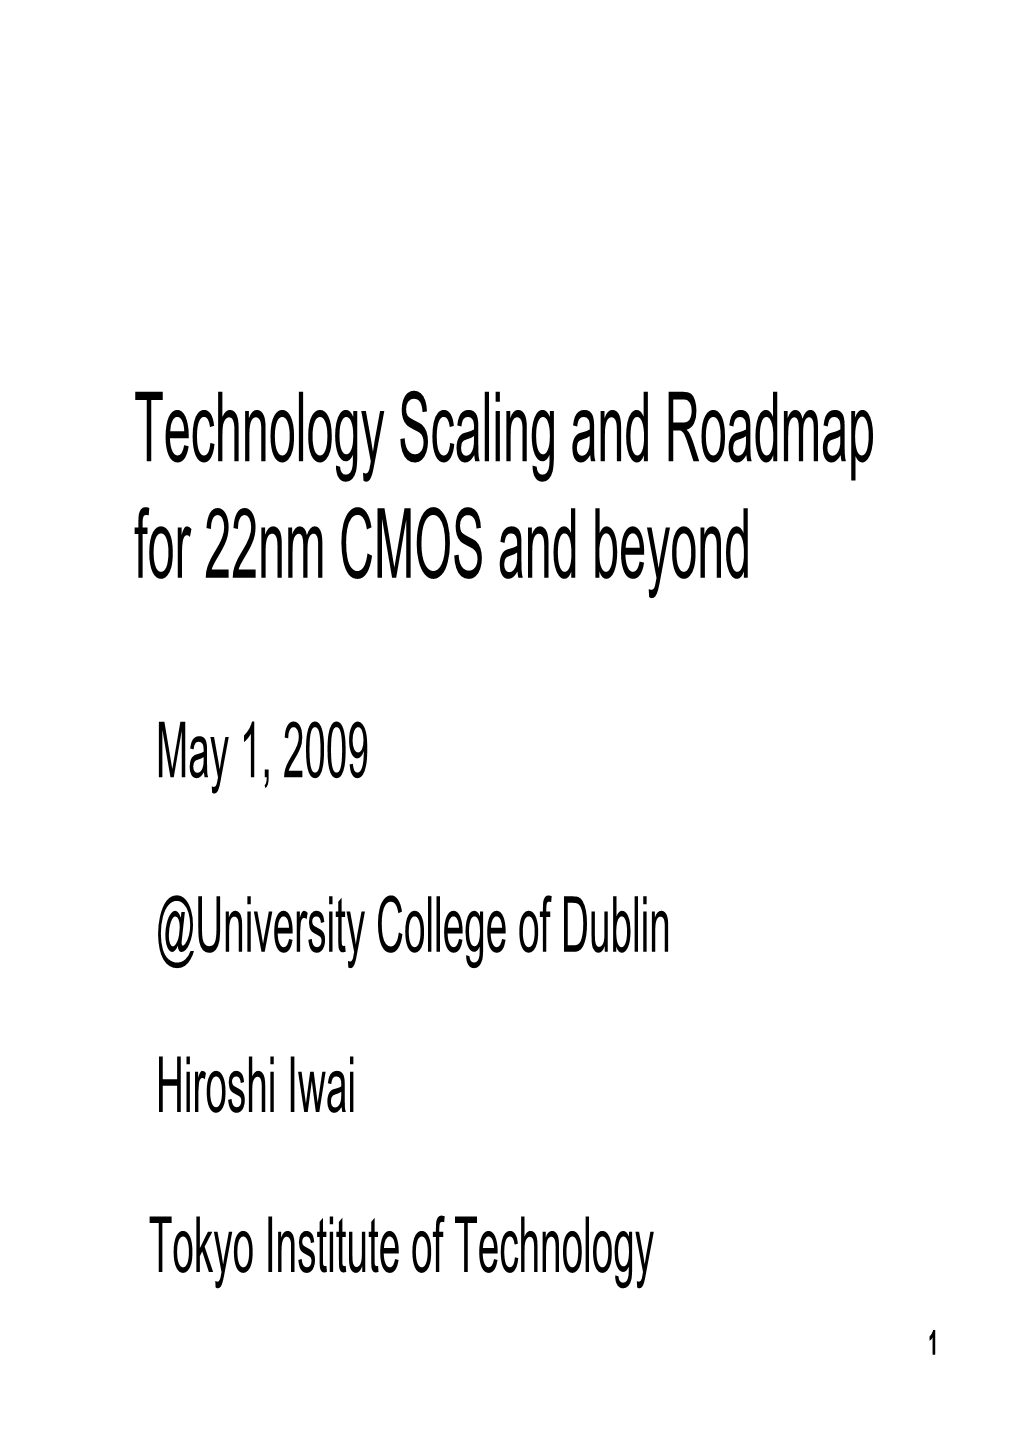 Technology Scaling and Roadmap for 22Nm CMOS and Beyond